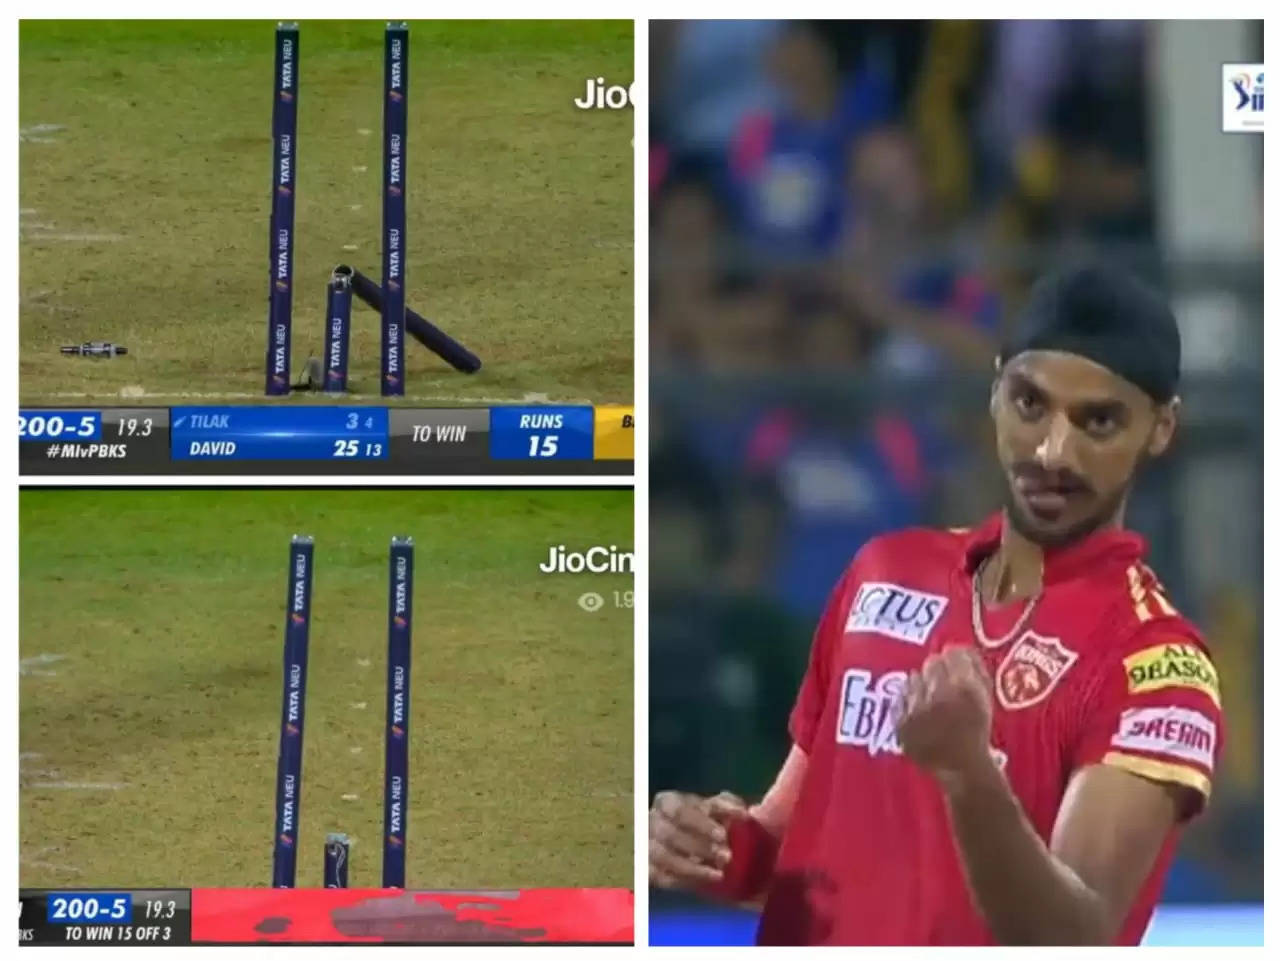 Arshdeep Singh broke stumps for fun in the last over.